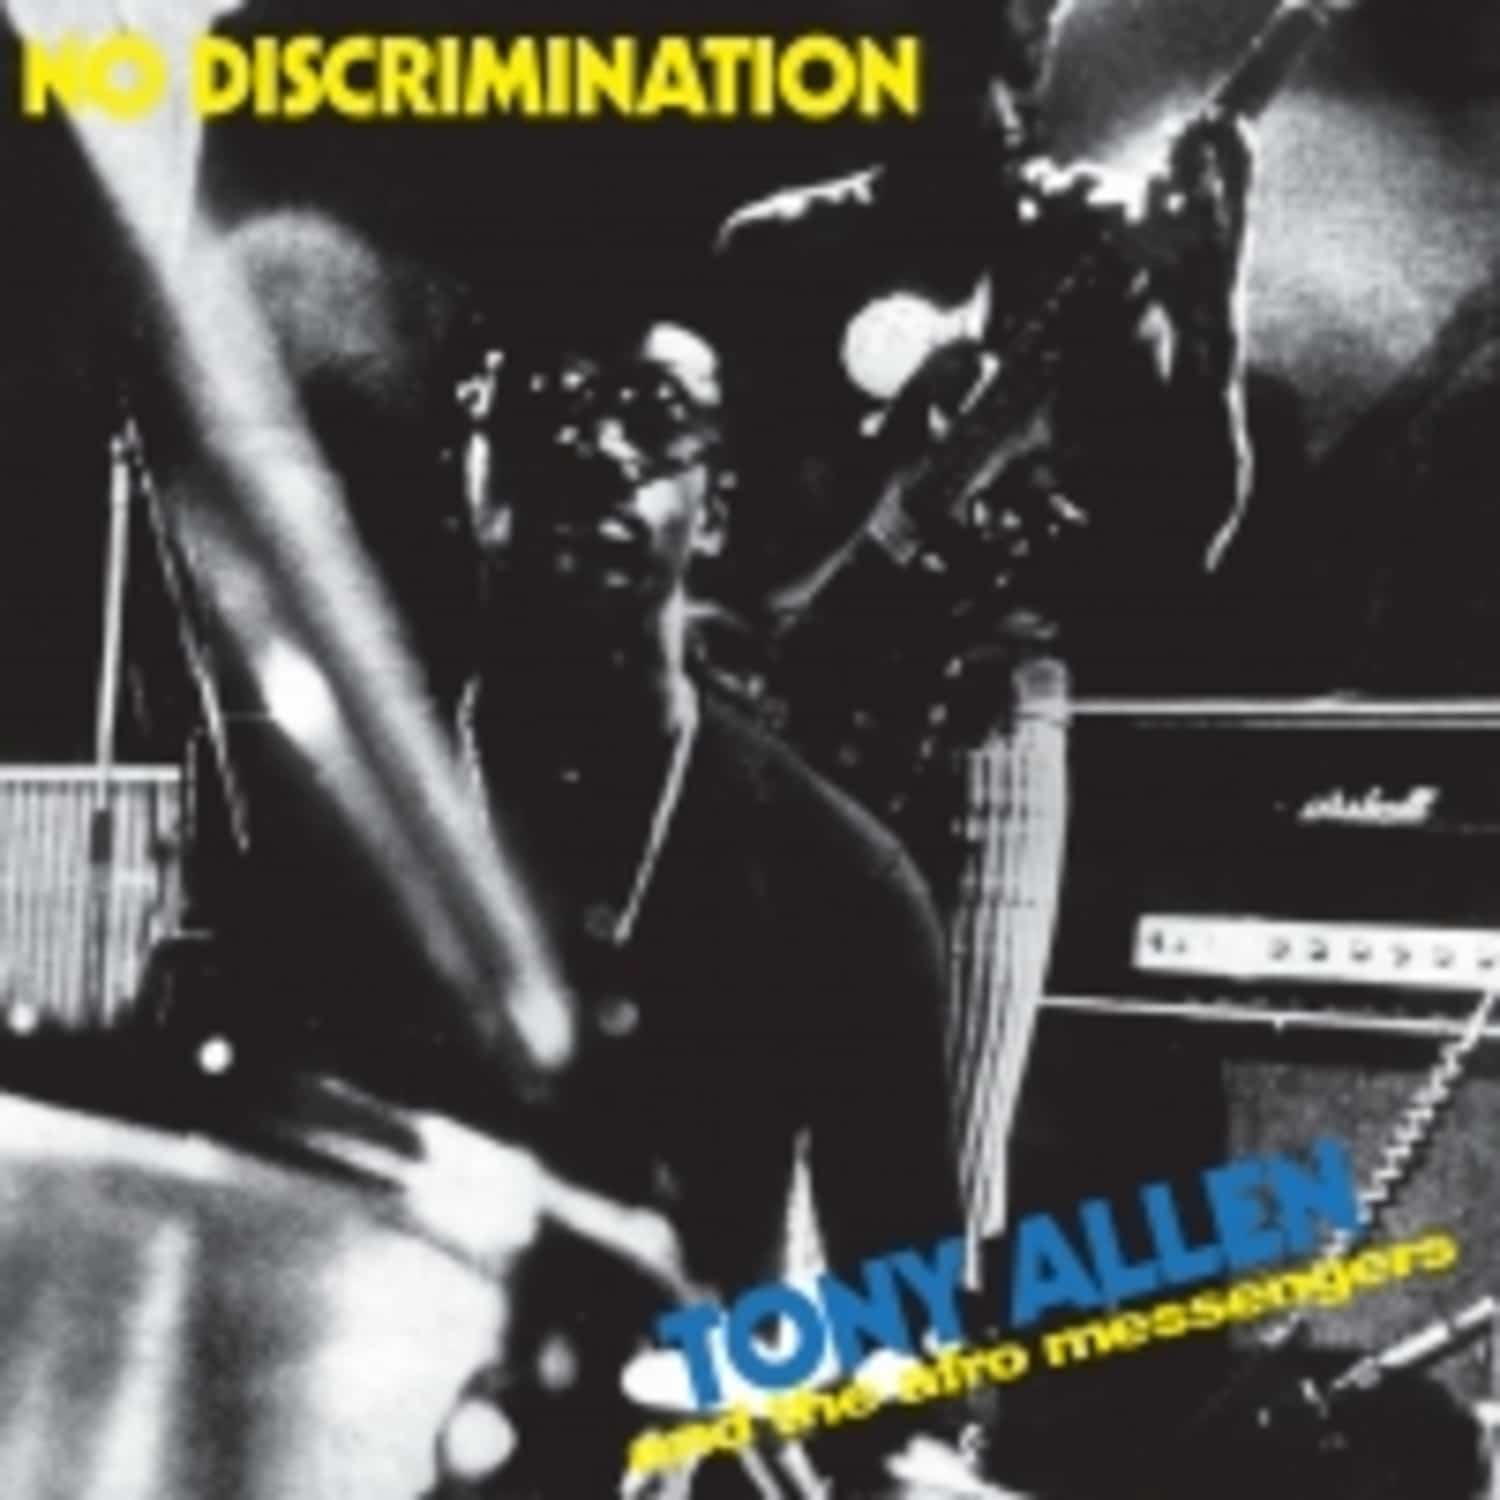 Tony Allen and The Afro Messengers - NO DISCRIMINATION 